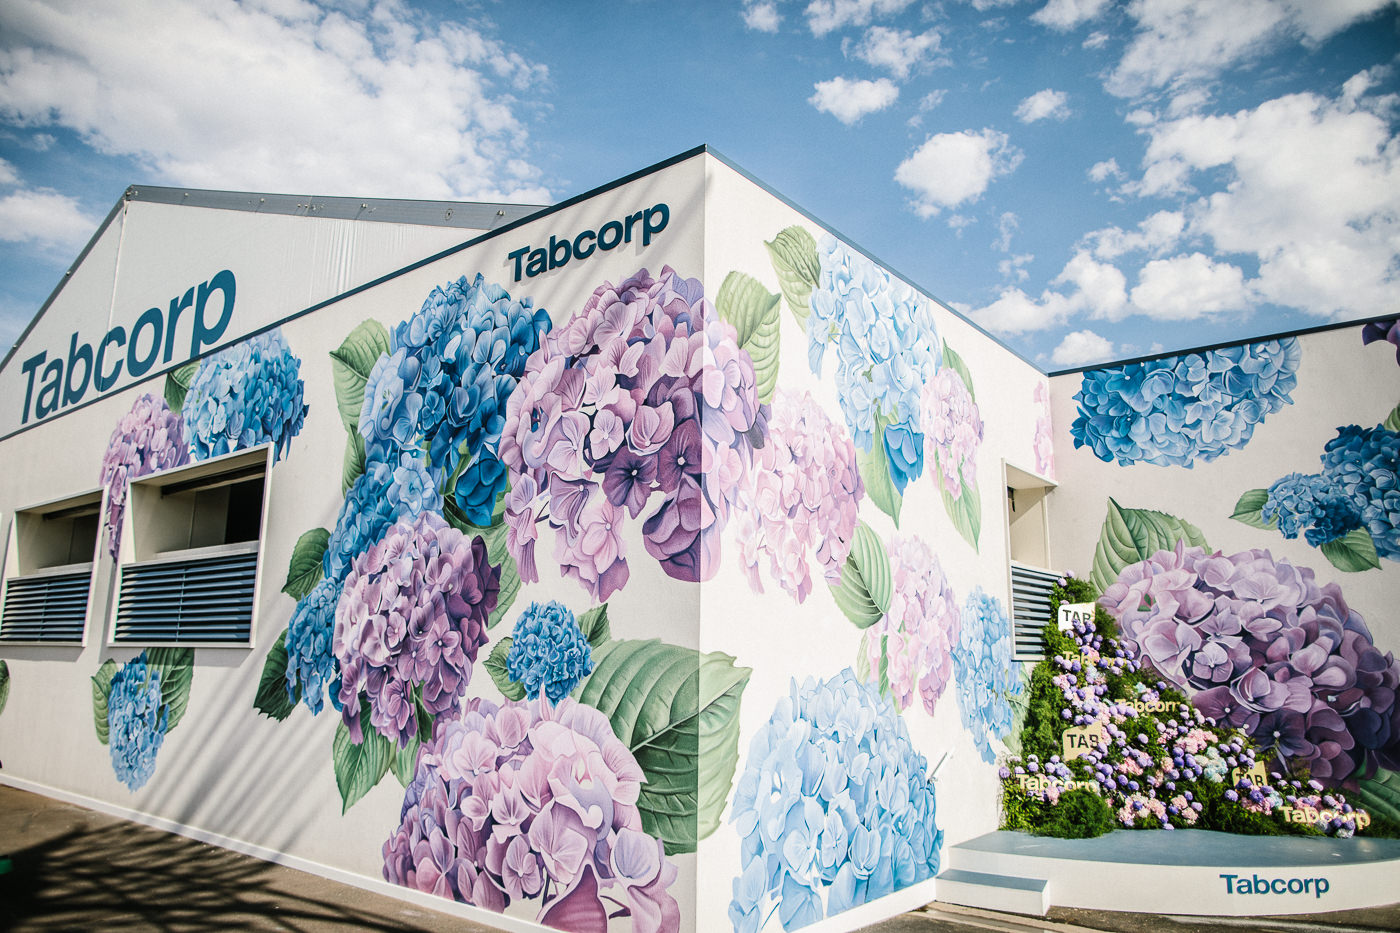 Bircage Marquee by Tabcorp 2019 at the Victorian Melbourne SprinG Racing Carnival 2019